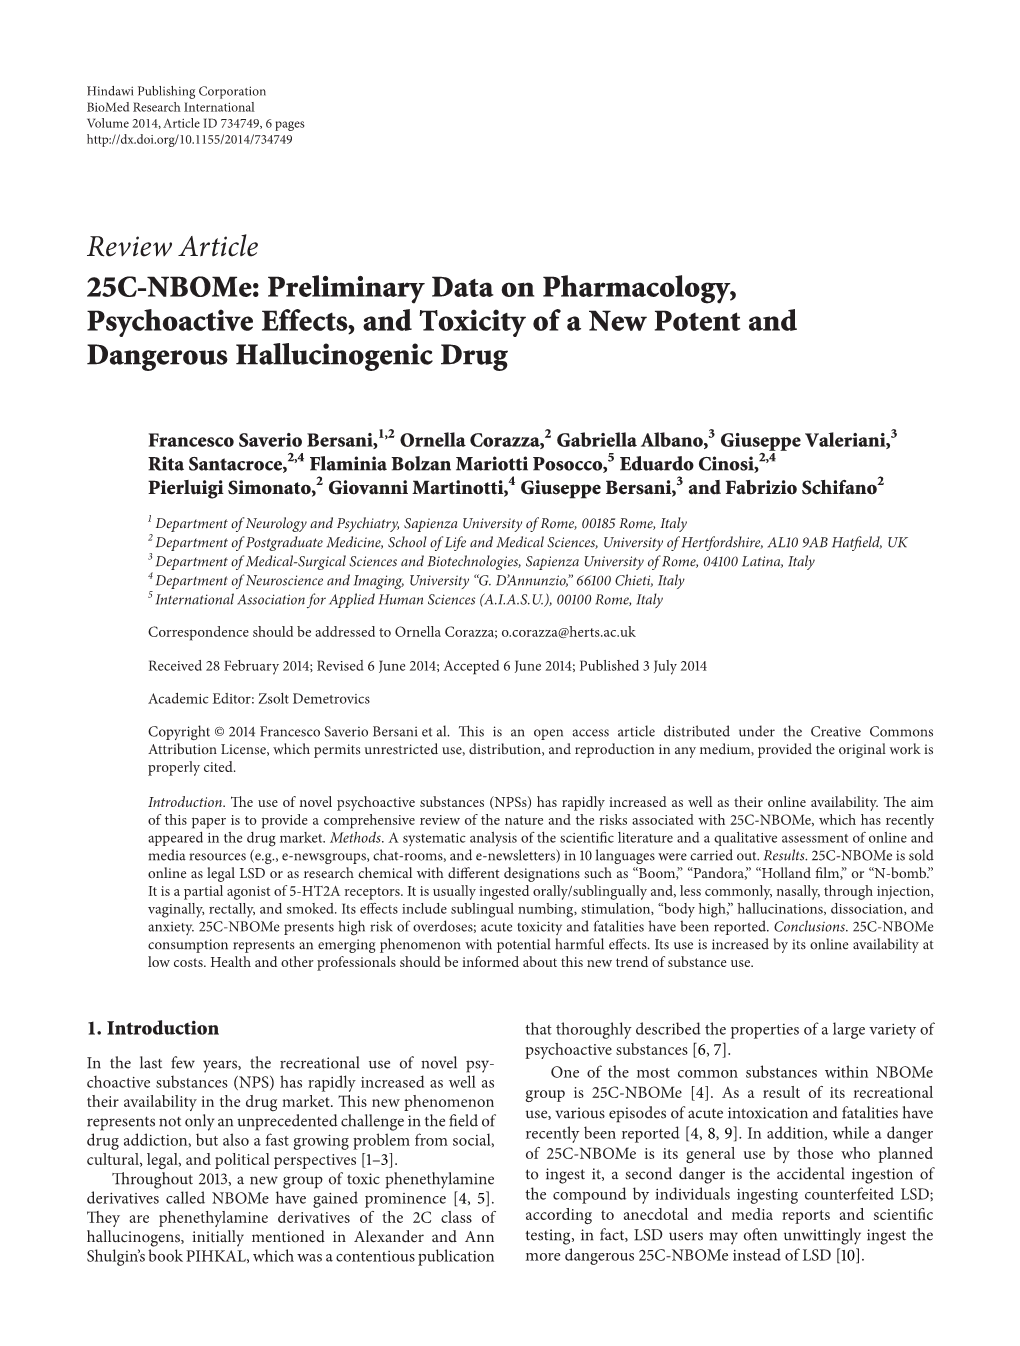 Review Article 25C-Nbome: Preliminary Data on Pharmacology, Psychoactive Effects, and Toxicity of a New Potent and Dangerous Hallucinogenic Drug